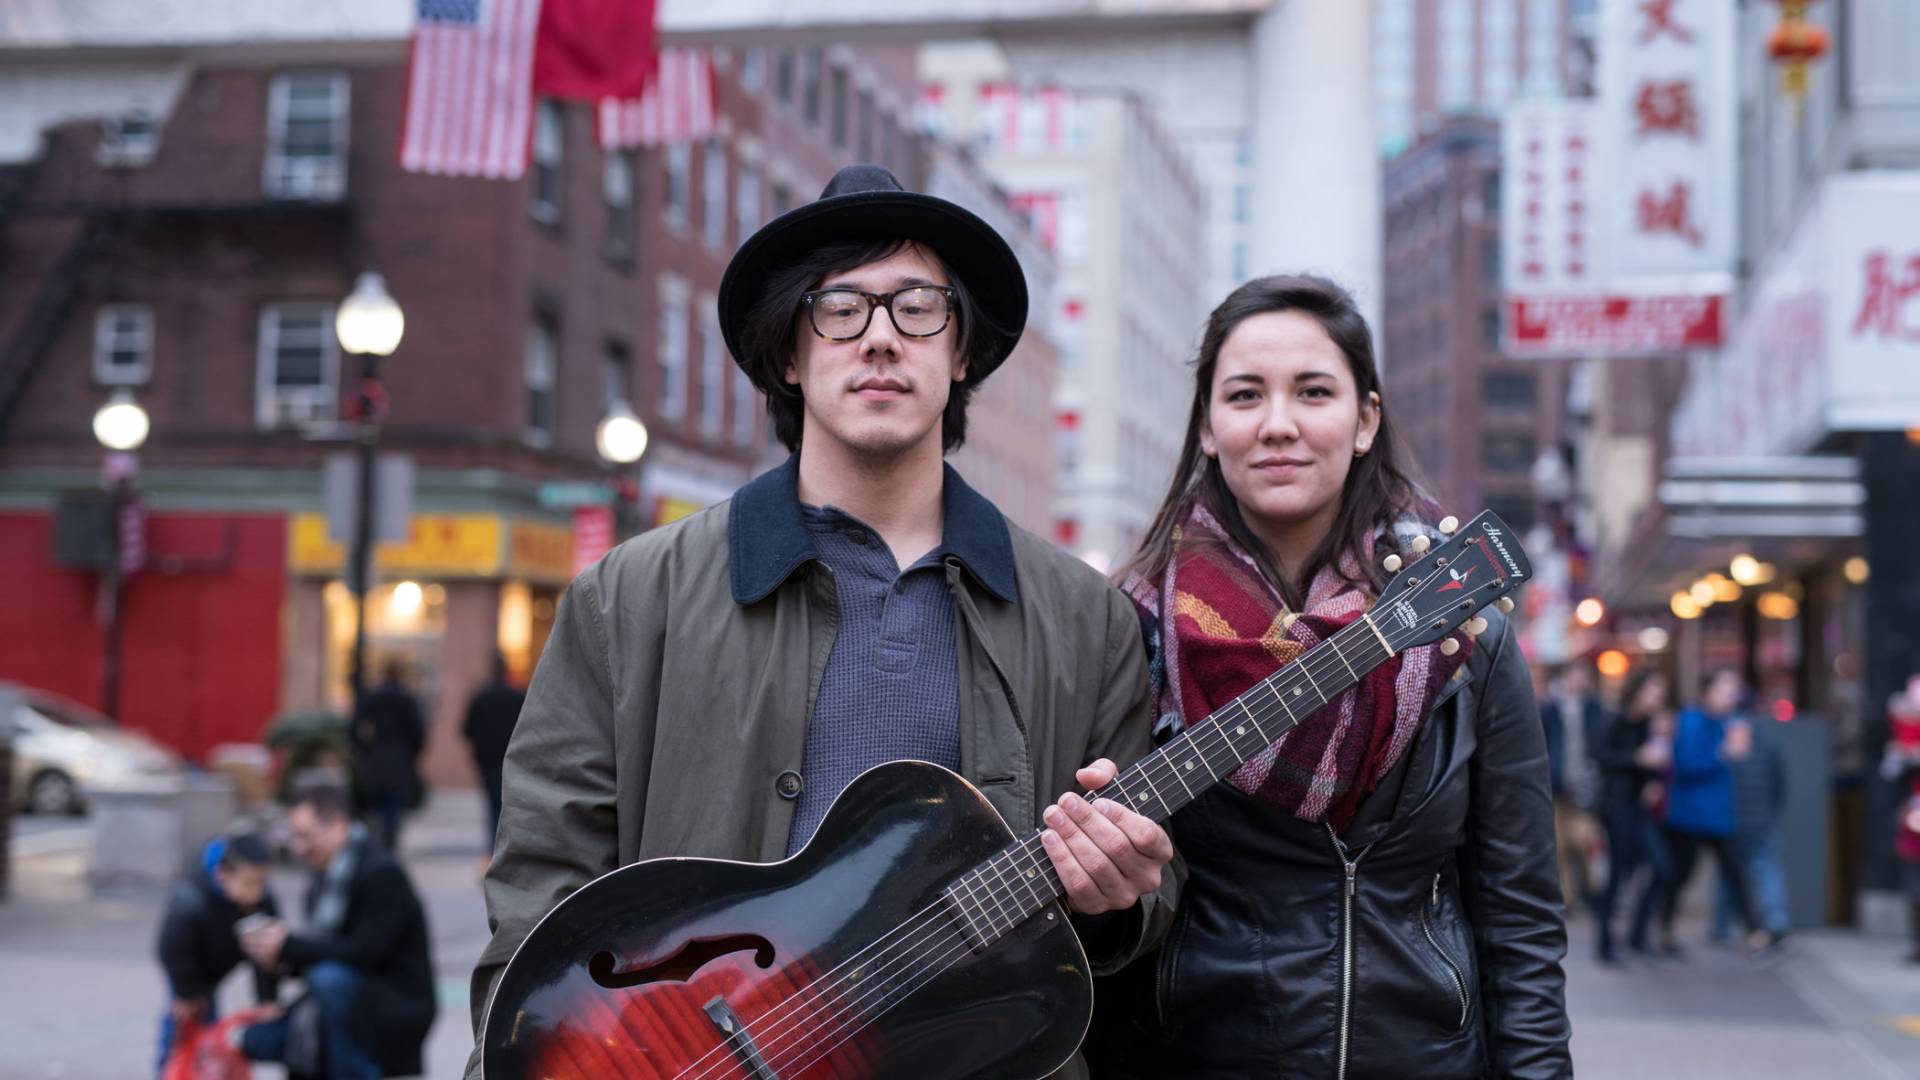 Young man in a hat holding an acoustic guitar standing next to a young woman